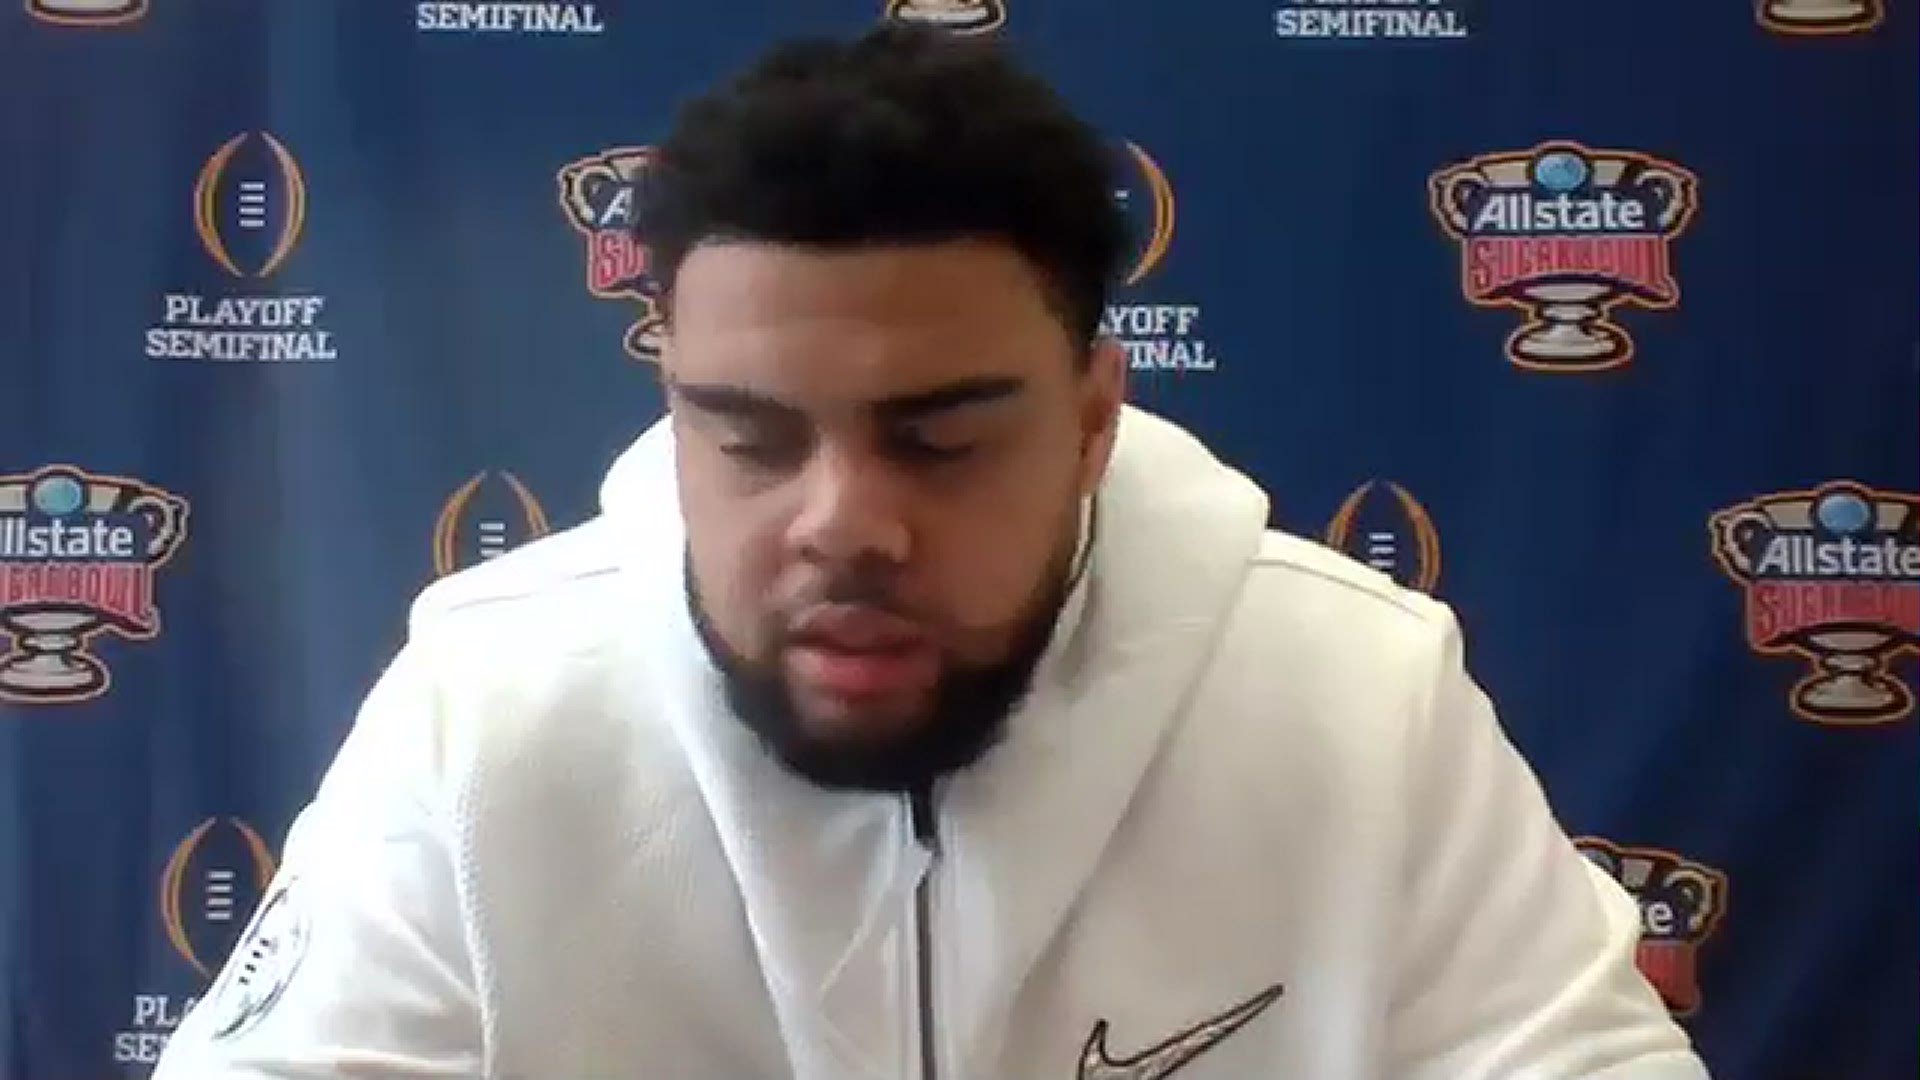 Defensive tackle Haskell Garrett discusses Ohio State's upcoming matchup against Clemson in the Sugar Bowl.